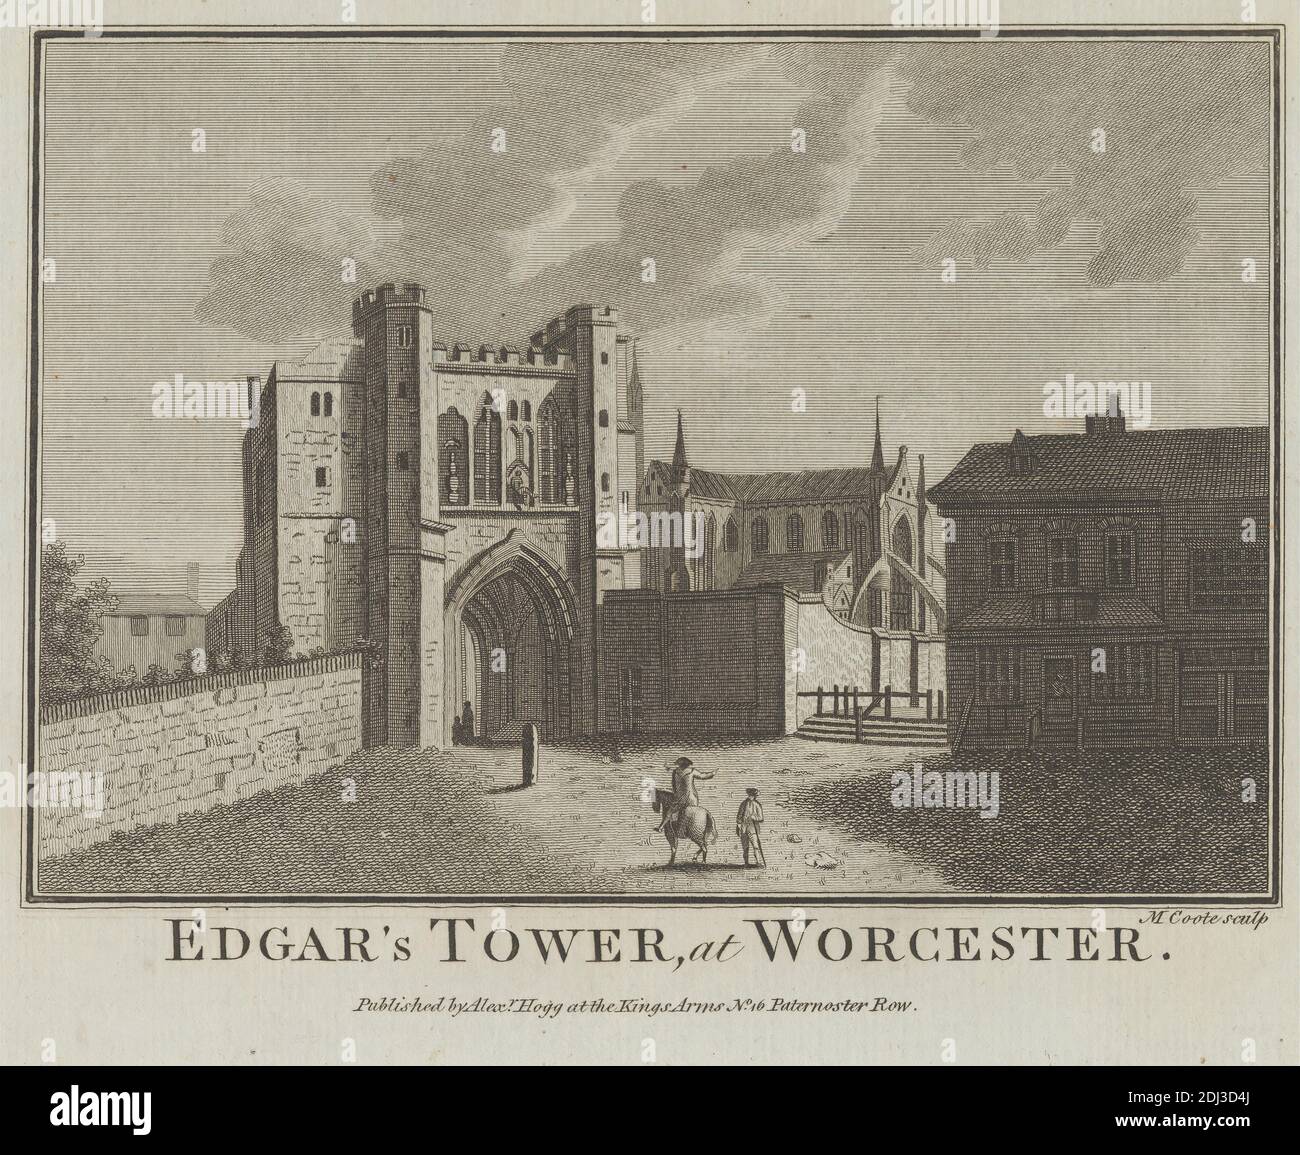 Edgar's Tower at Worcester, Print made by M. Coote, active 1876, after unknown artist, Published by Alexander Hogg, active 1778–1824, British, before 1786, Line engraving and etching on medium, slightly textured, light blue laid paper, Sheet: 7 5/8 x 9 1/4 inches (19.4 x 23.5 cm), Plate: 6 7/8 x 8 15/16 inches (17.5 x 22.7 cm), and Image: 5 1/16 x 7 3/16 inches (12.8 x 18.2 cm), arches, architectural subject, architecture, buildings, cathedral, church, city, cityscape, gate, gateway, genre subject, gesture, horse (animal), houses, men, path, pointing, stairs, tower (building division), town Stock Photo